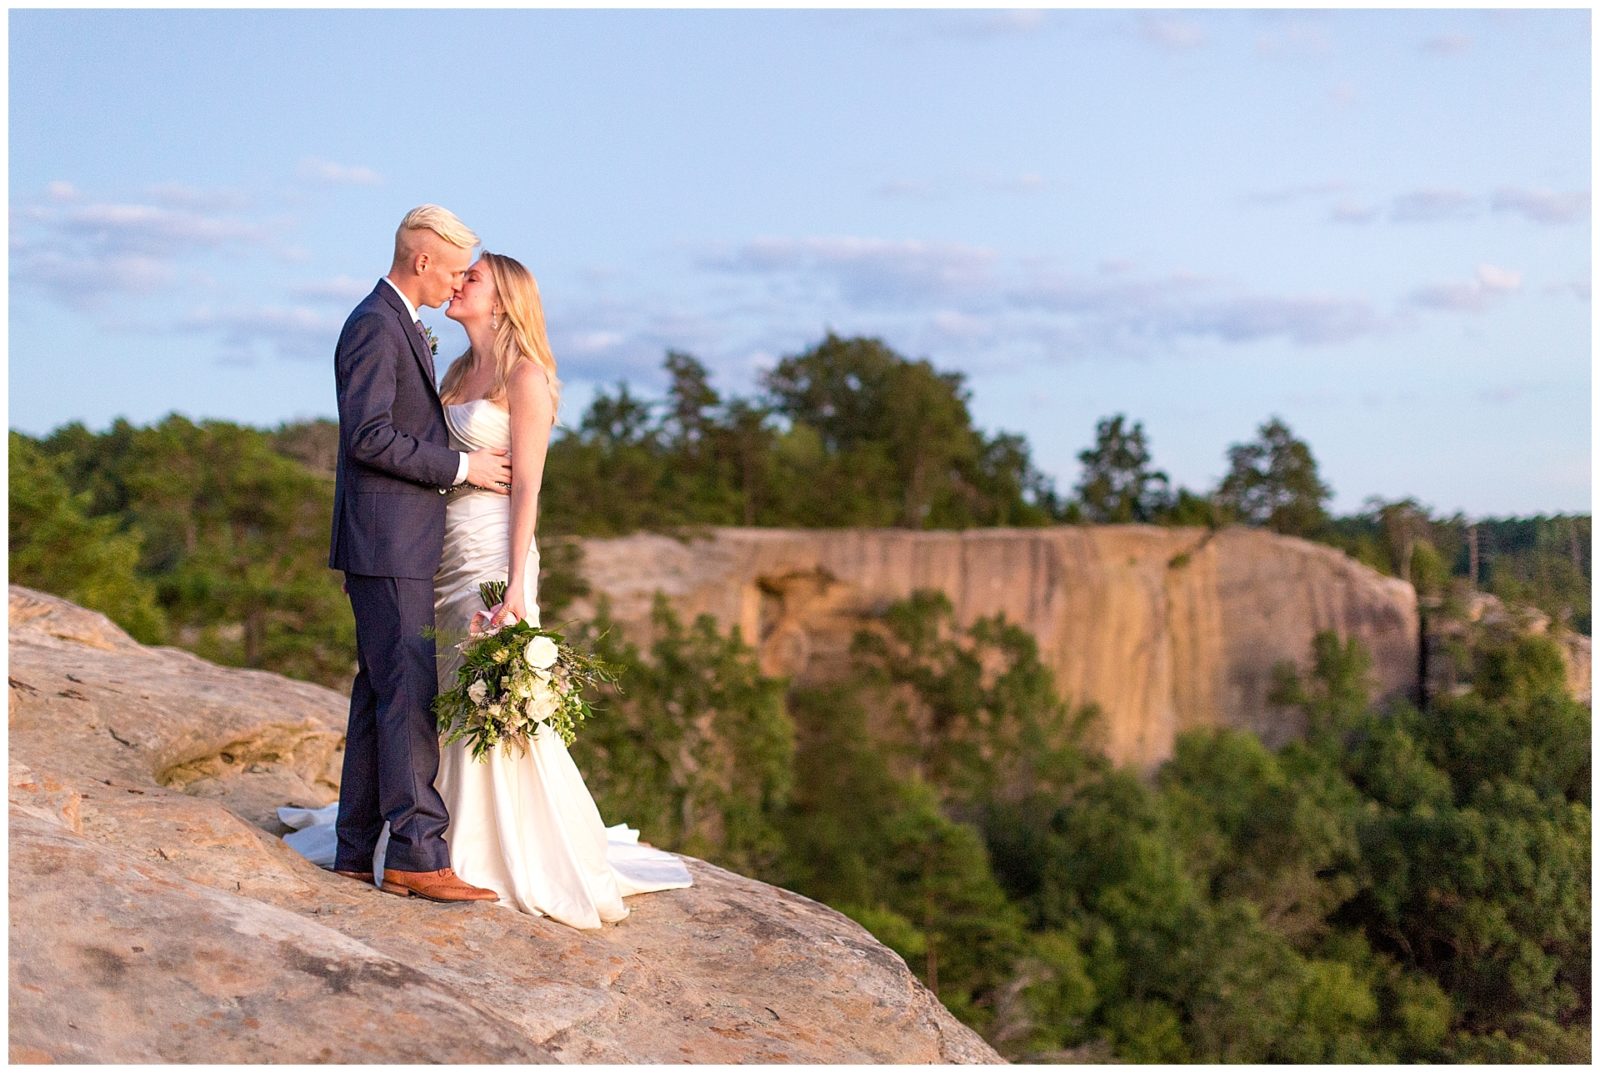 Epic Red River Gorge bride and groom portrait session on Auxier Ridge. Experience one of Kentucky's most magical hiking trails. Photos by: Kevin and Anna Photography www.kevinandannaweddings.com